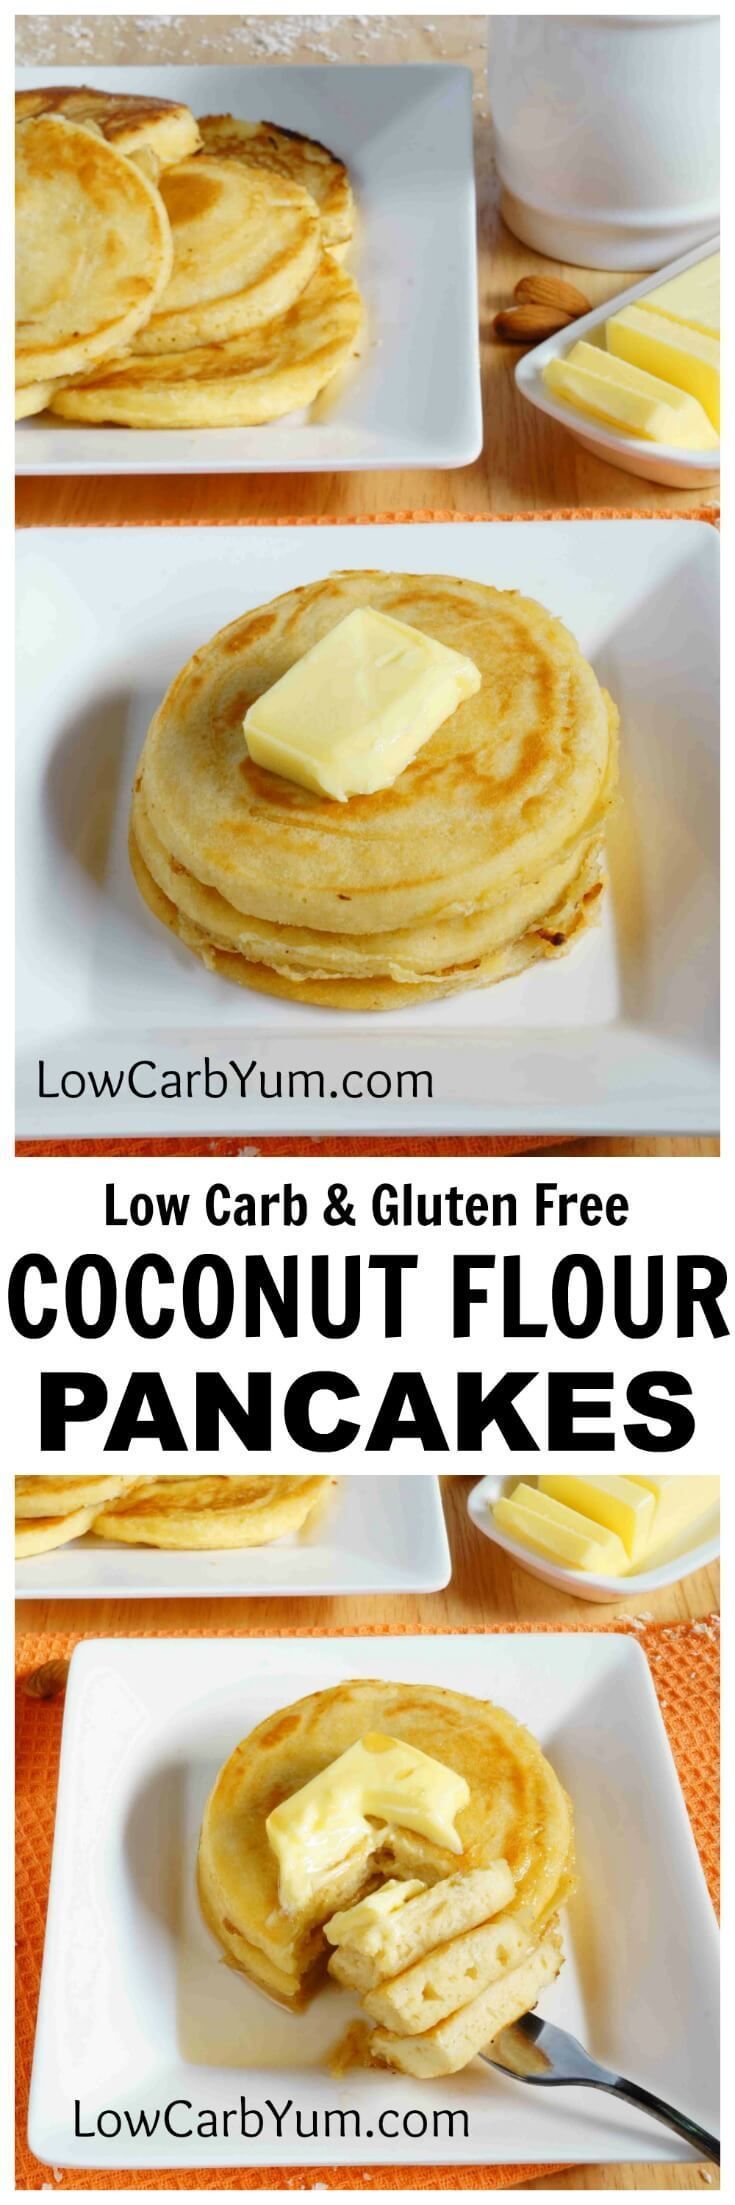 An easy recipe for fluffy gluten free coconut flour pancakes. Such a tasty breakfast treat! Enjoy them with your favorite low carb